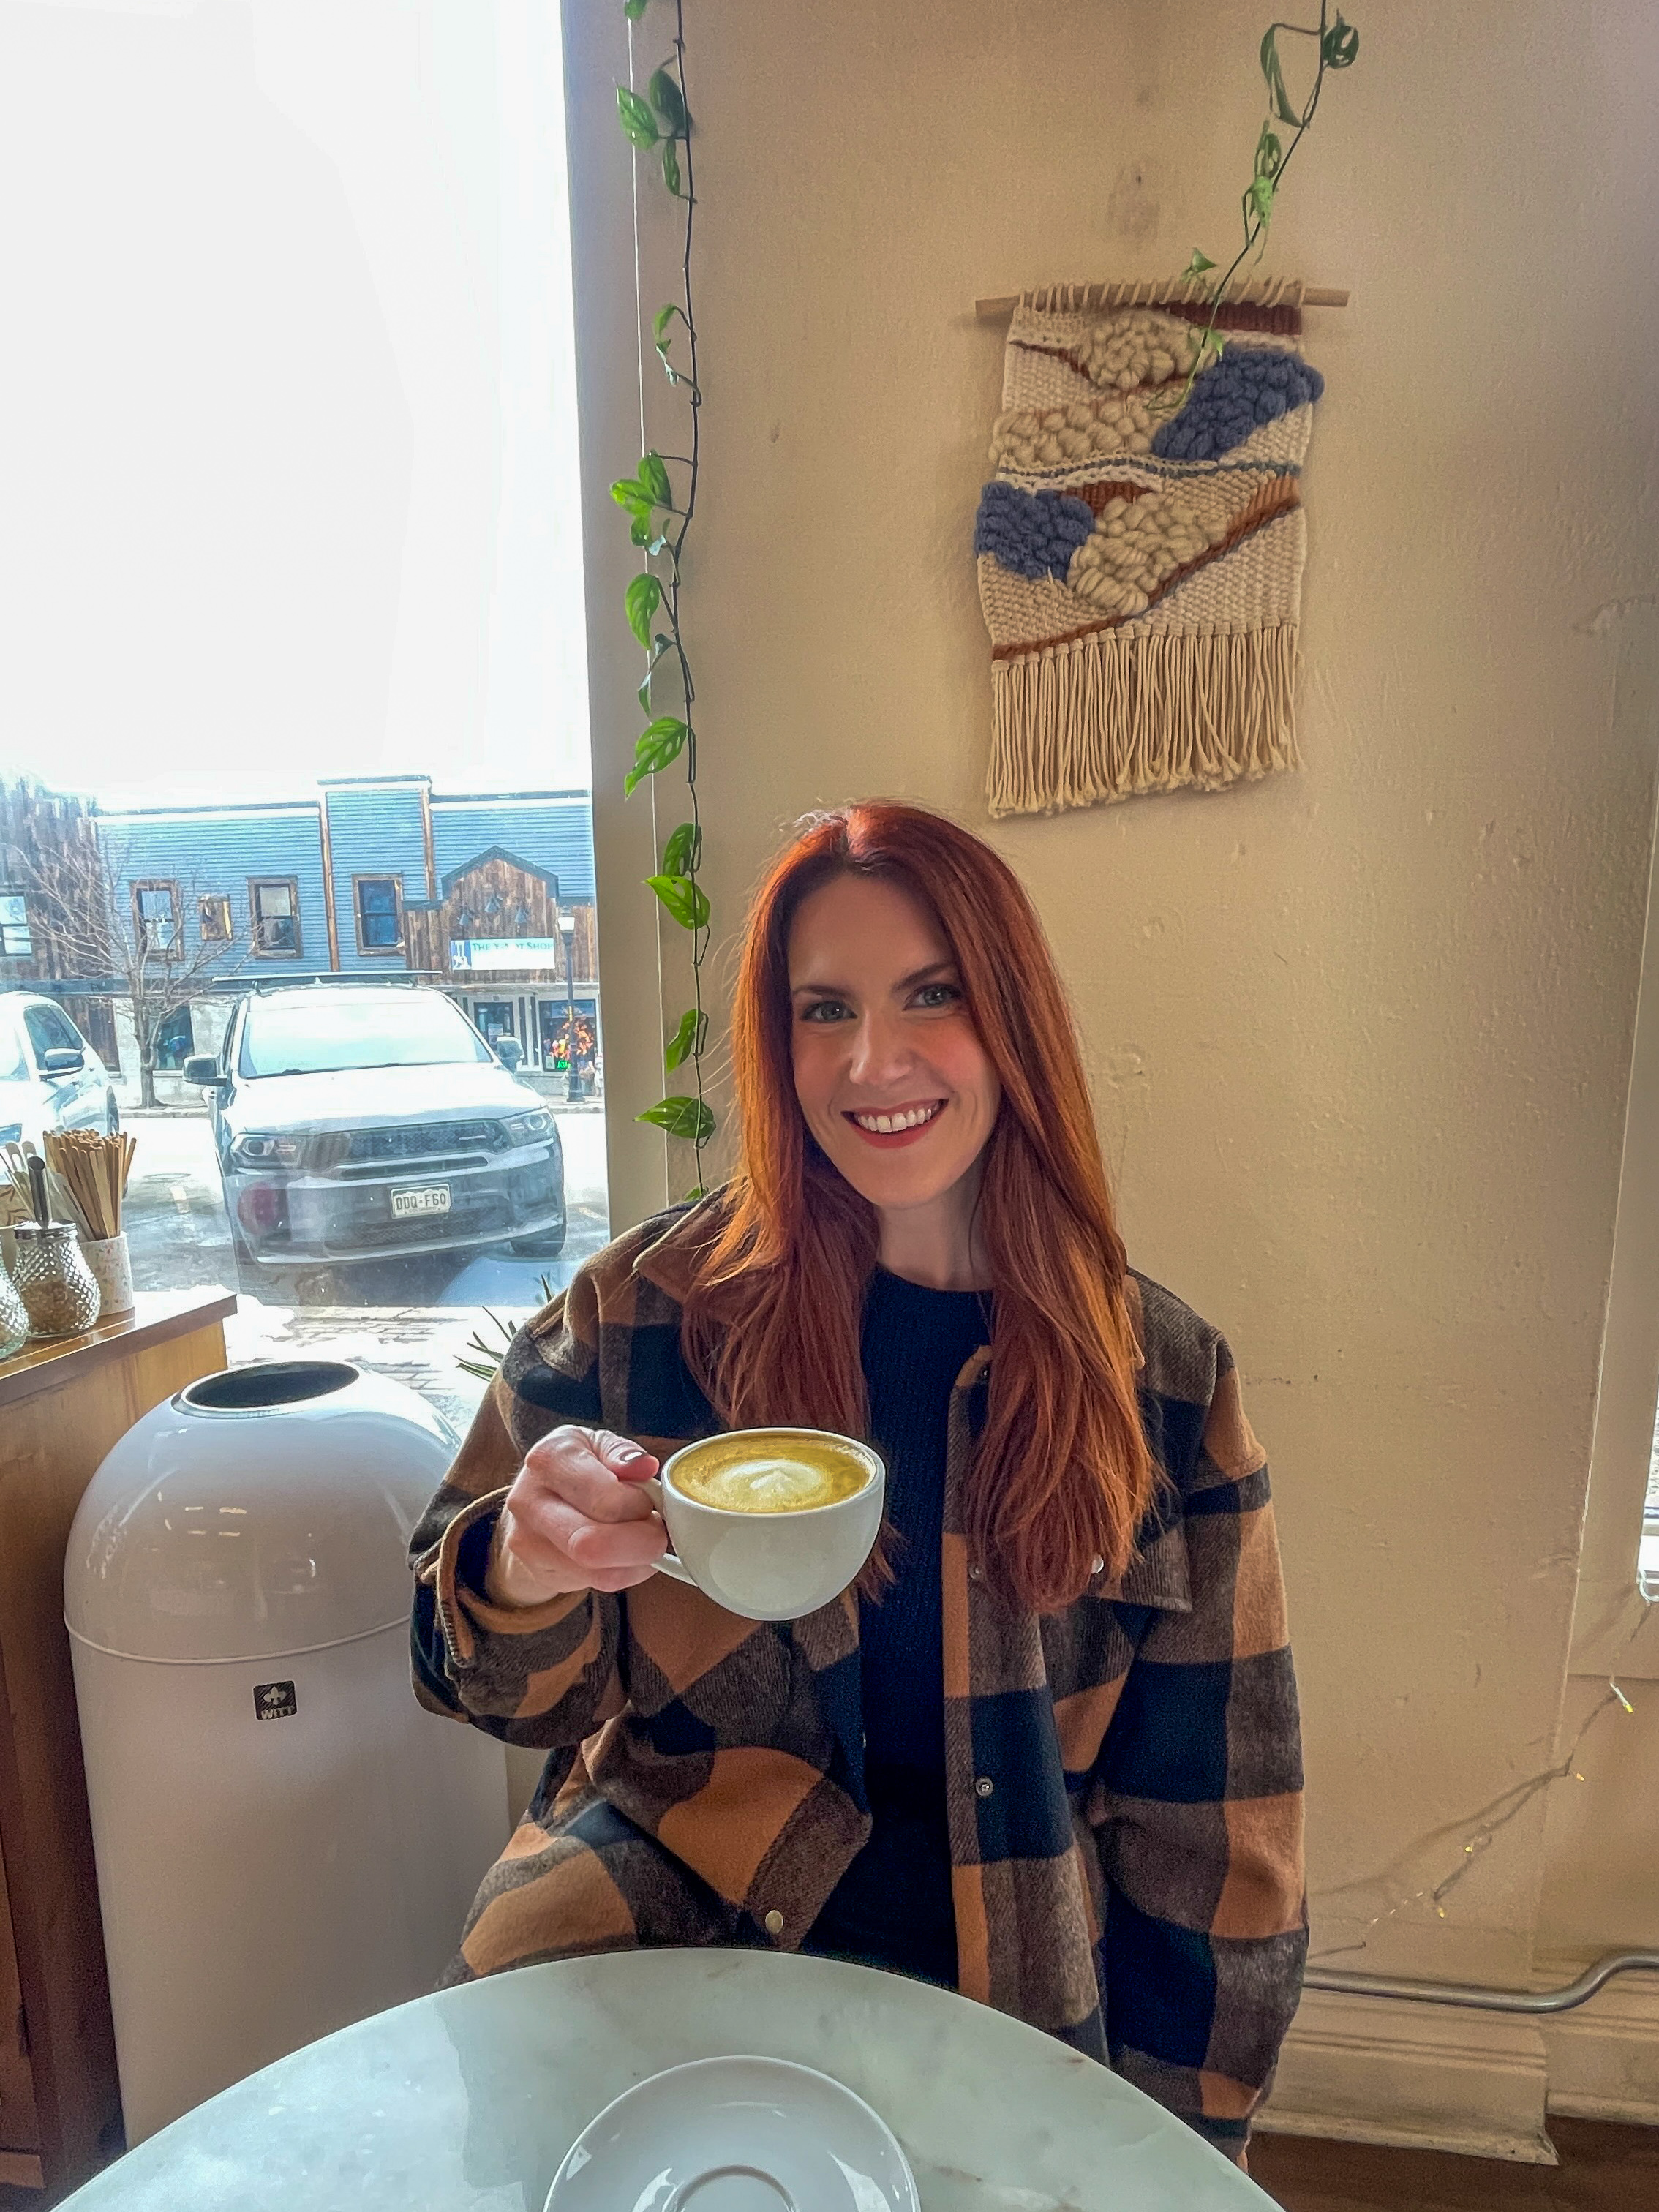 Amanda Bittner enjoys a latte at brunch. She has long auburn hair and is wearing a black and tan flannel coat.